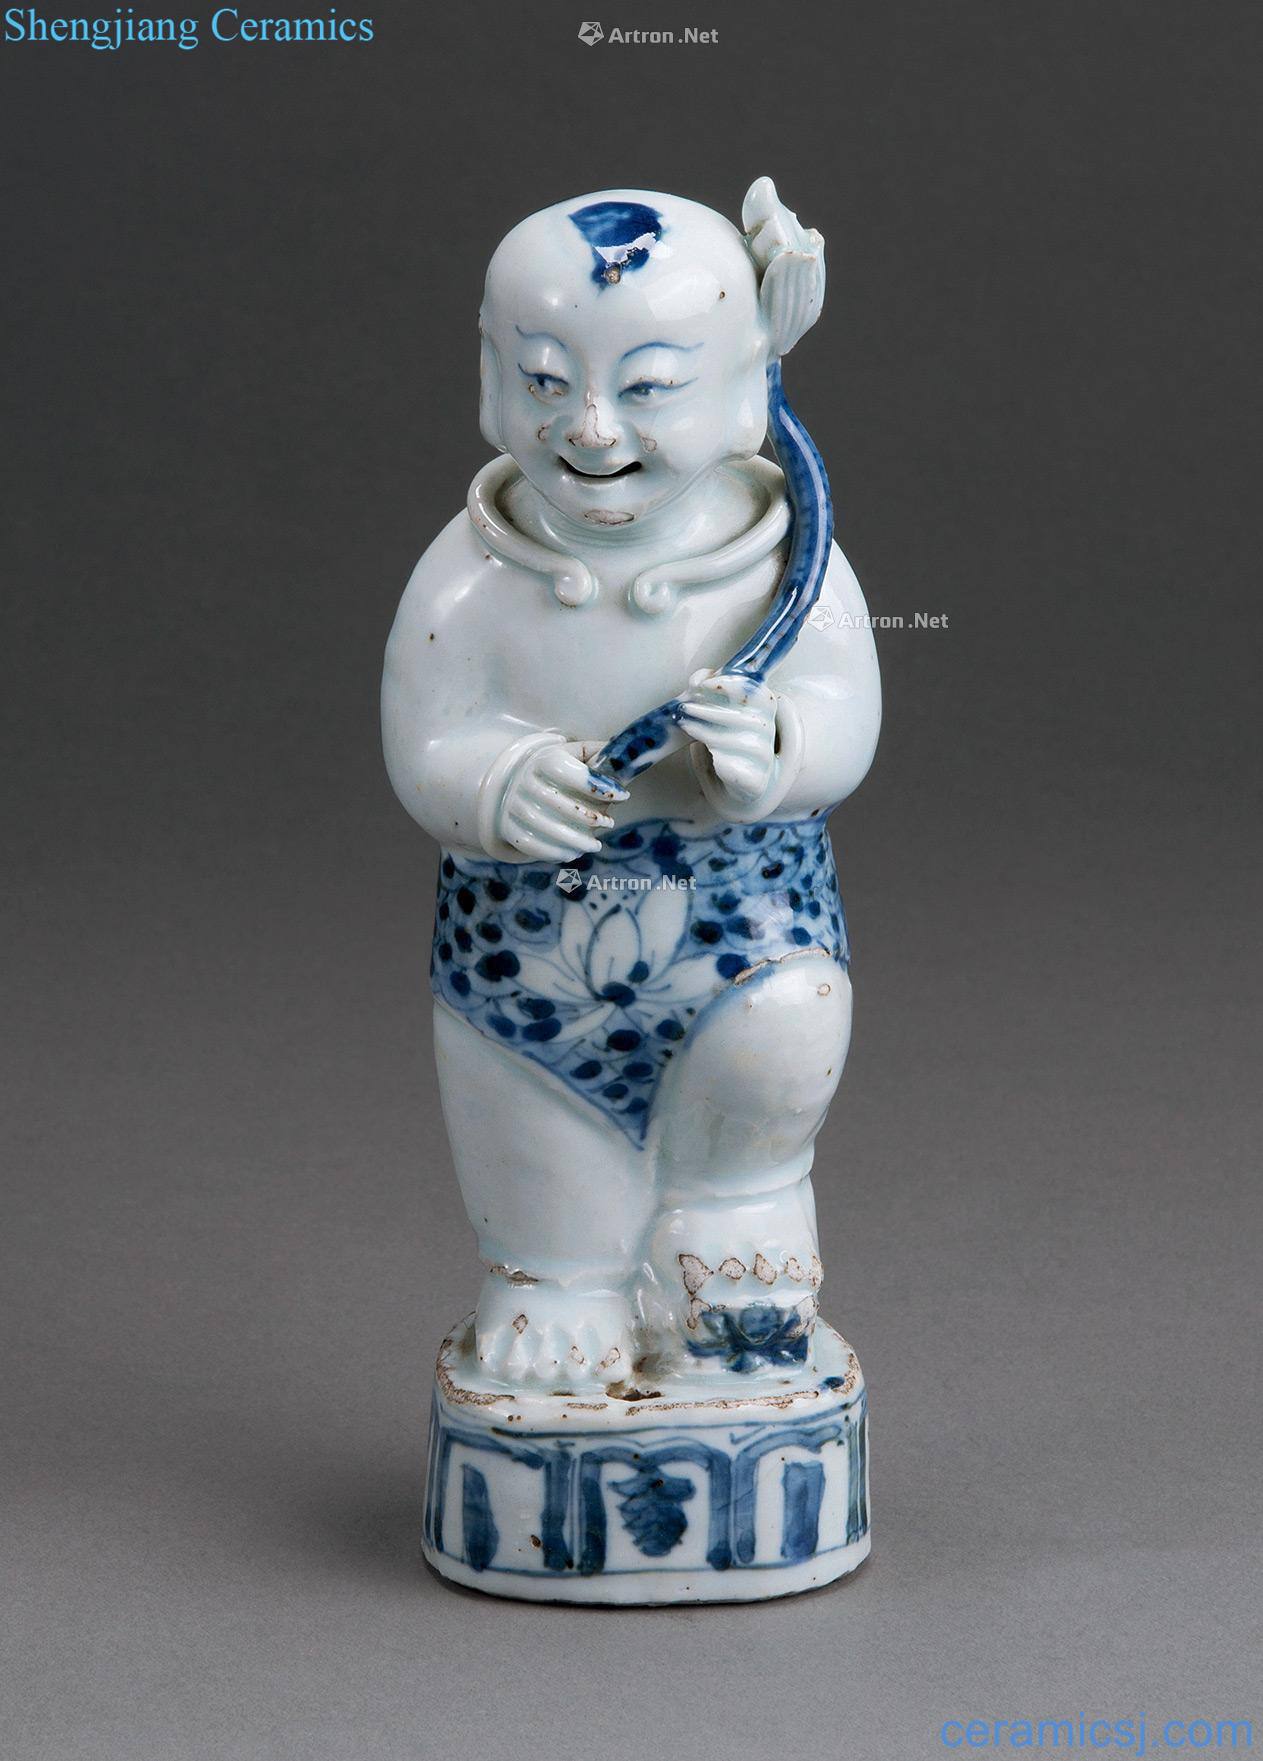 The late Ming dynasty Blue and white figure stands resemble